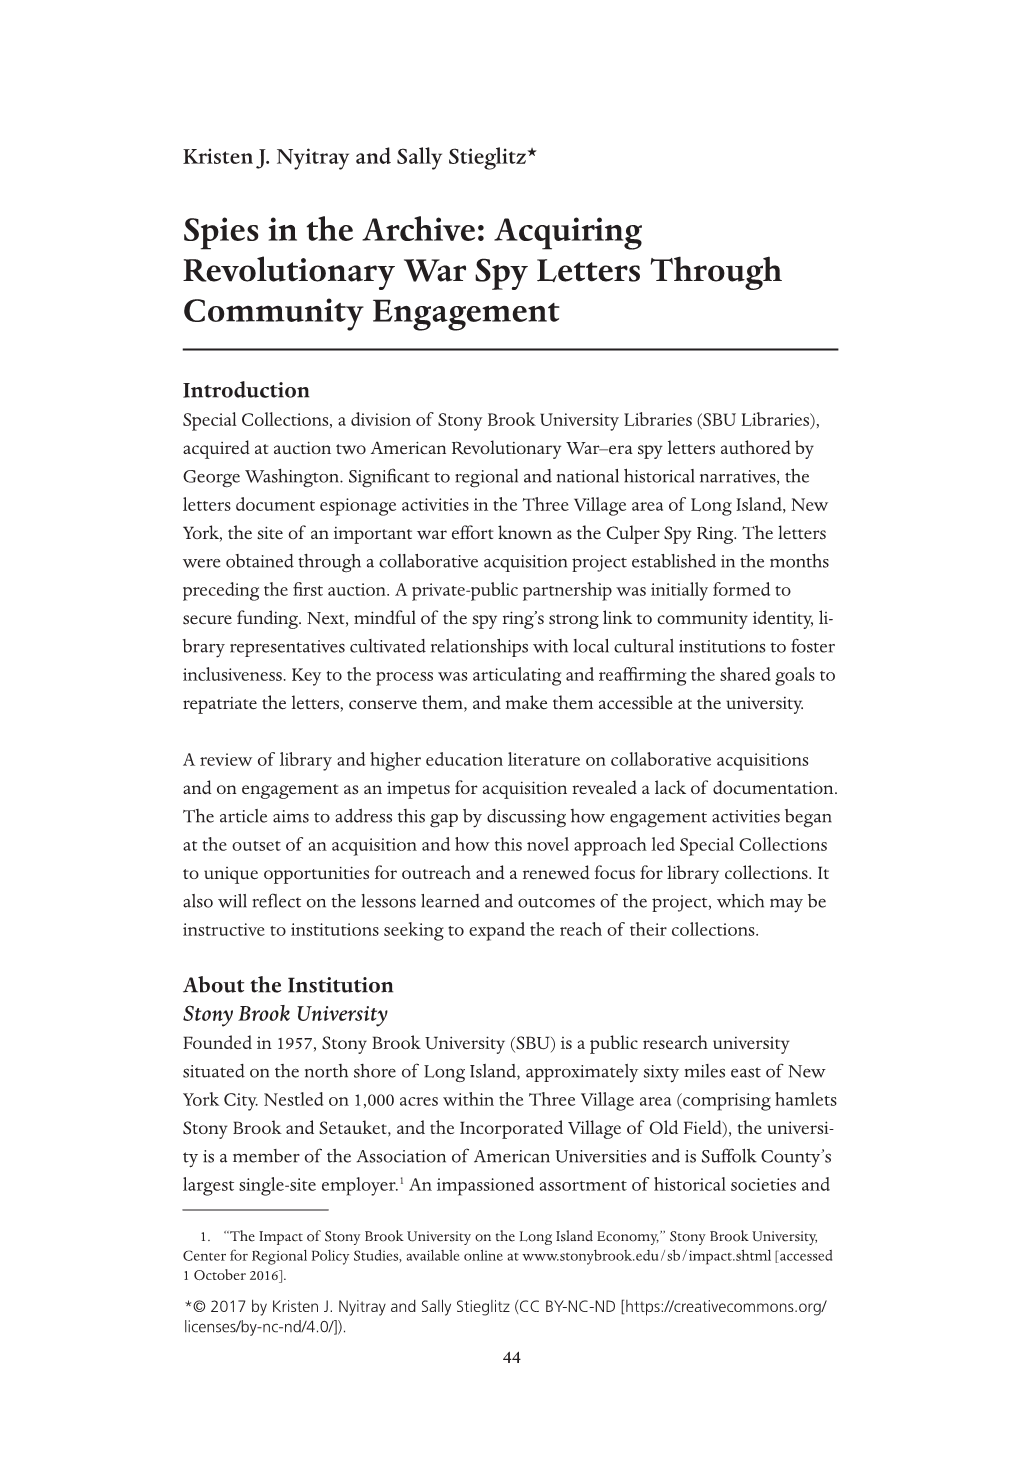 Spies in the Archive: Acquiring Revolutionary War Spy Letters Through Community Engagement